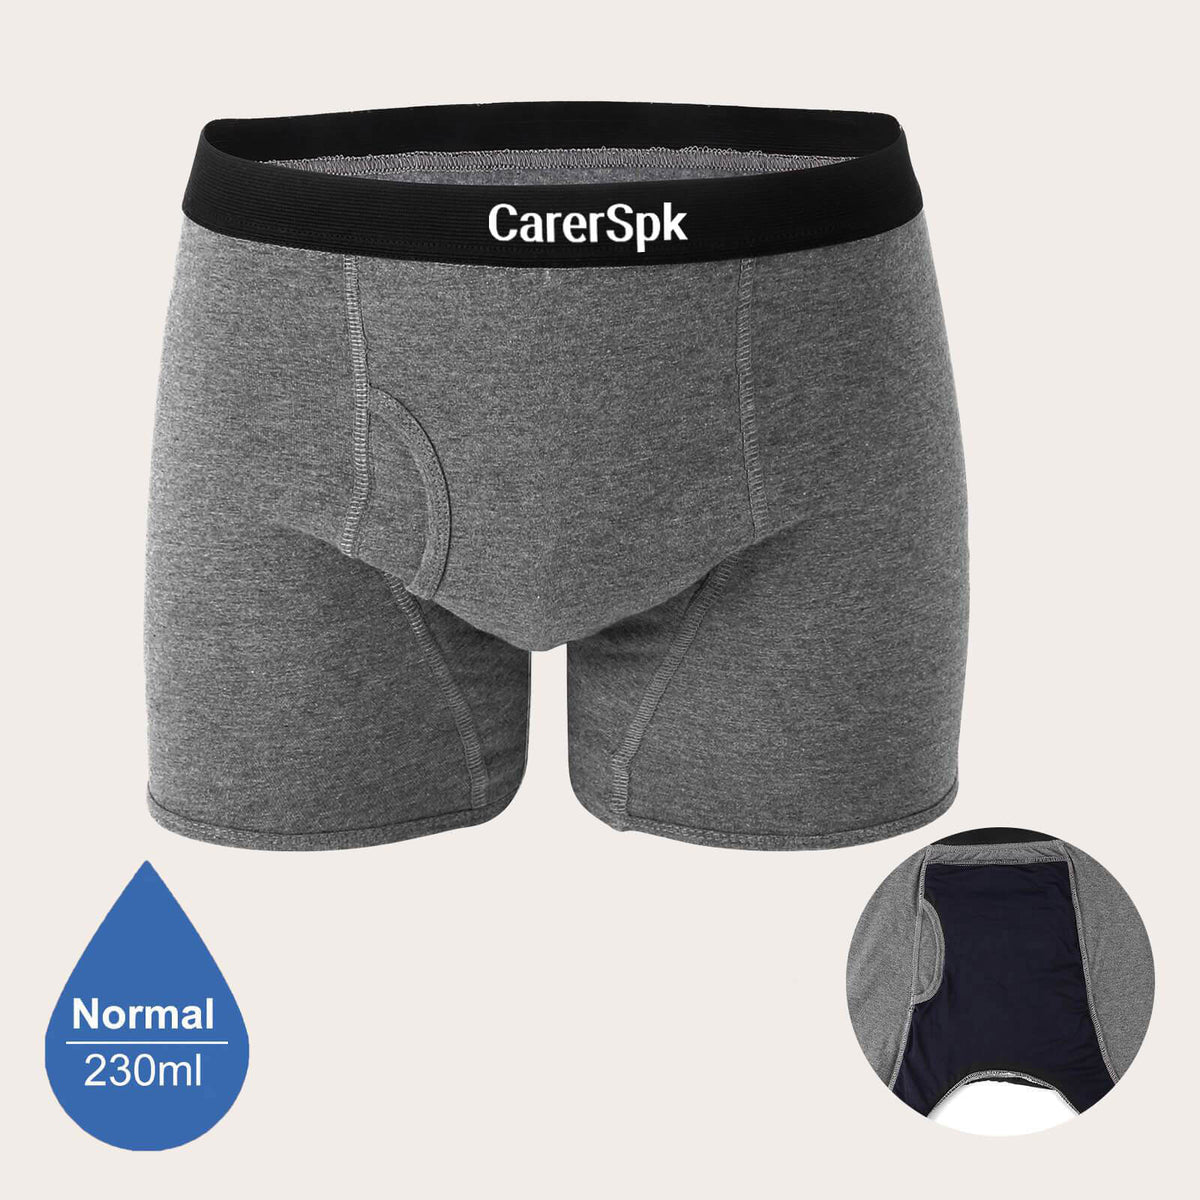 CARERSPK Men's Incontinence Underwear with Fly - M99